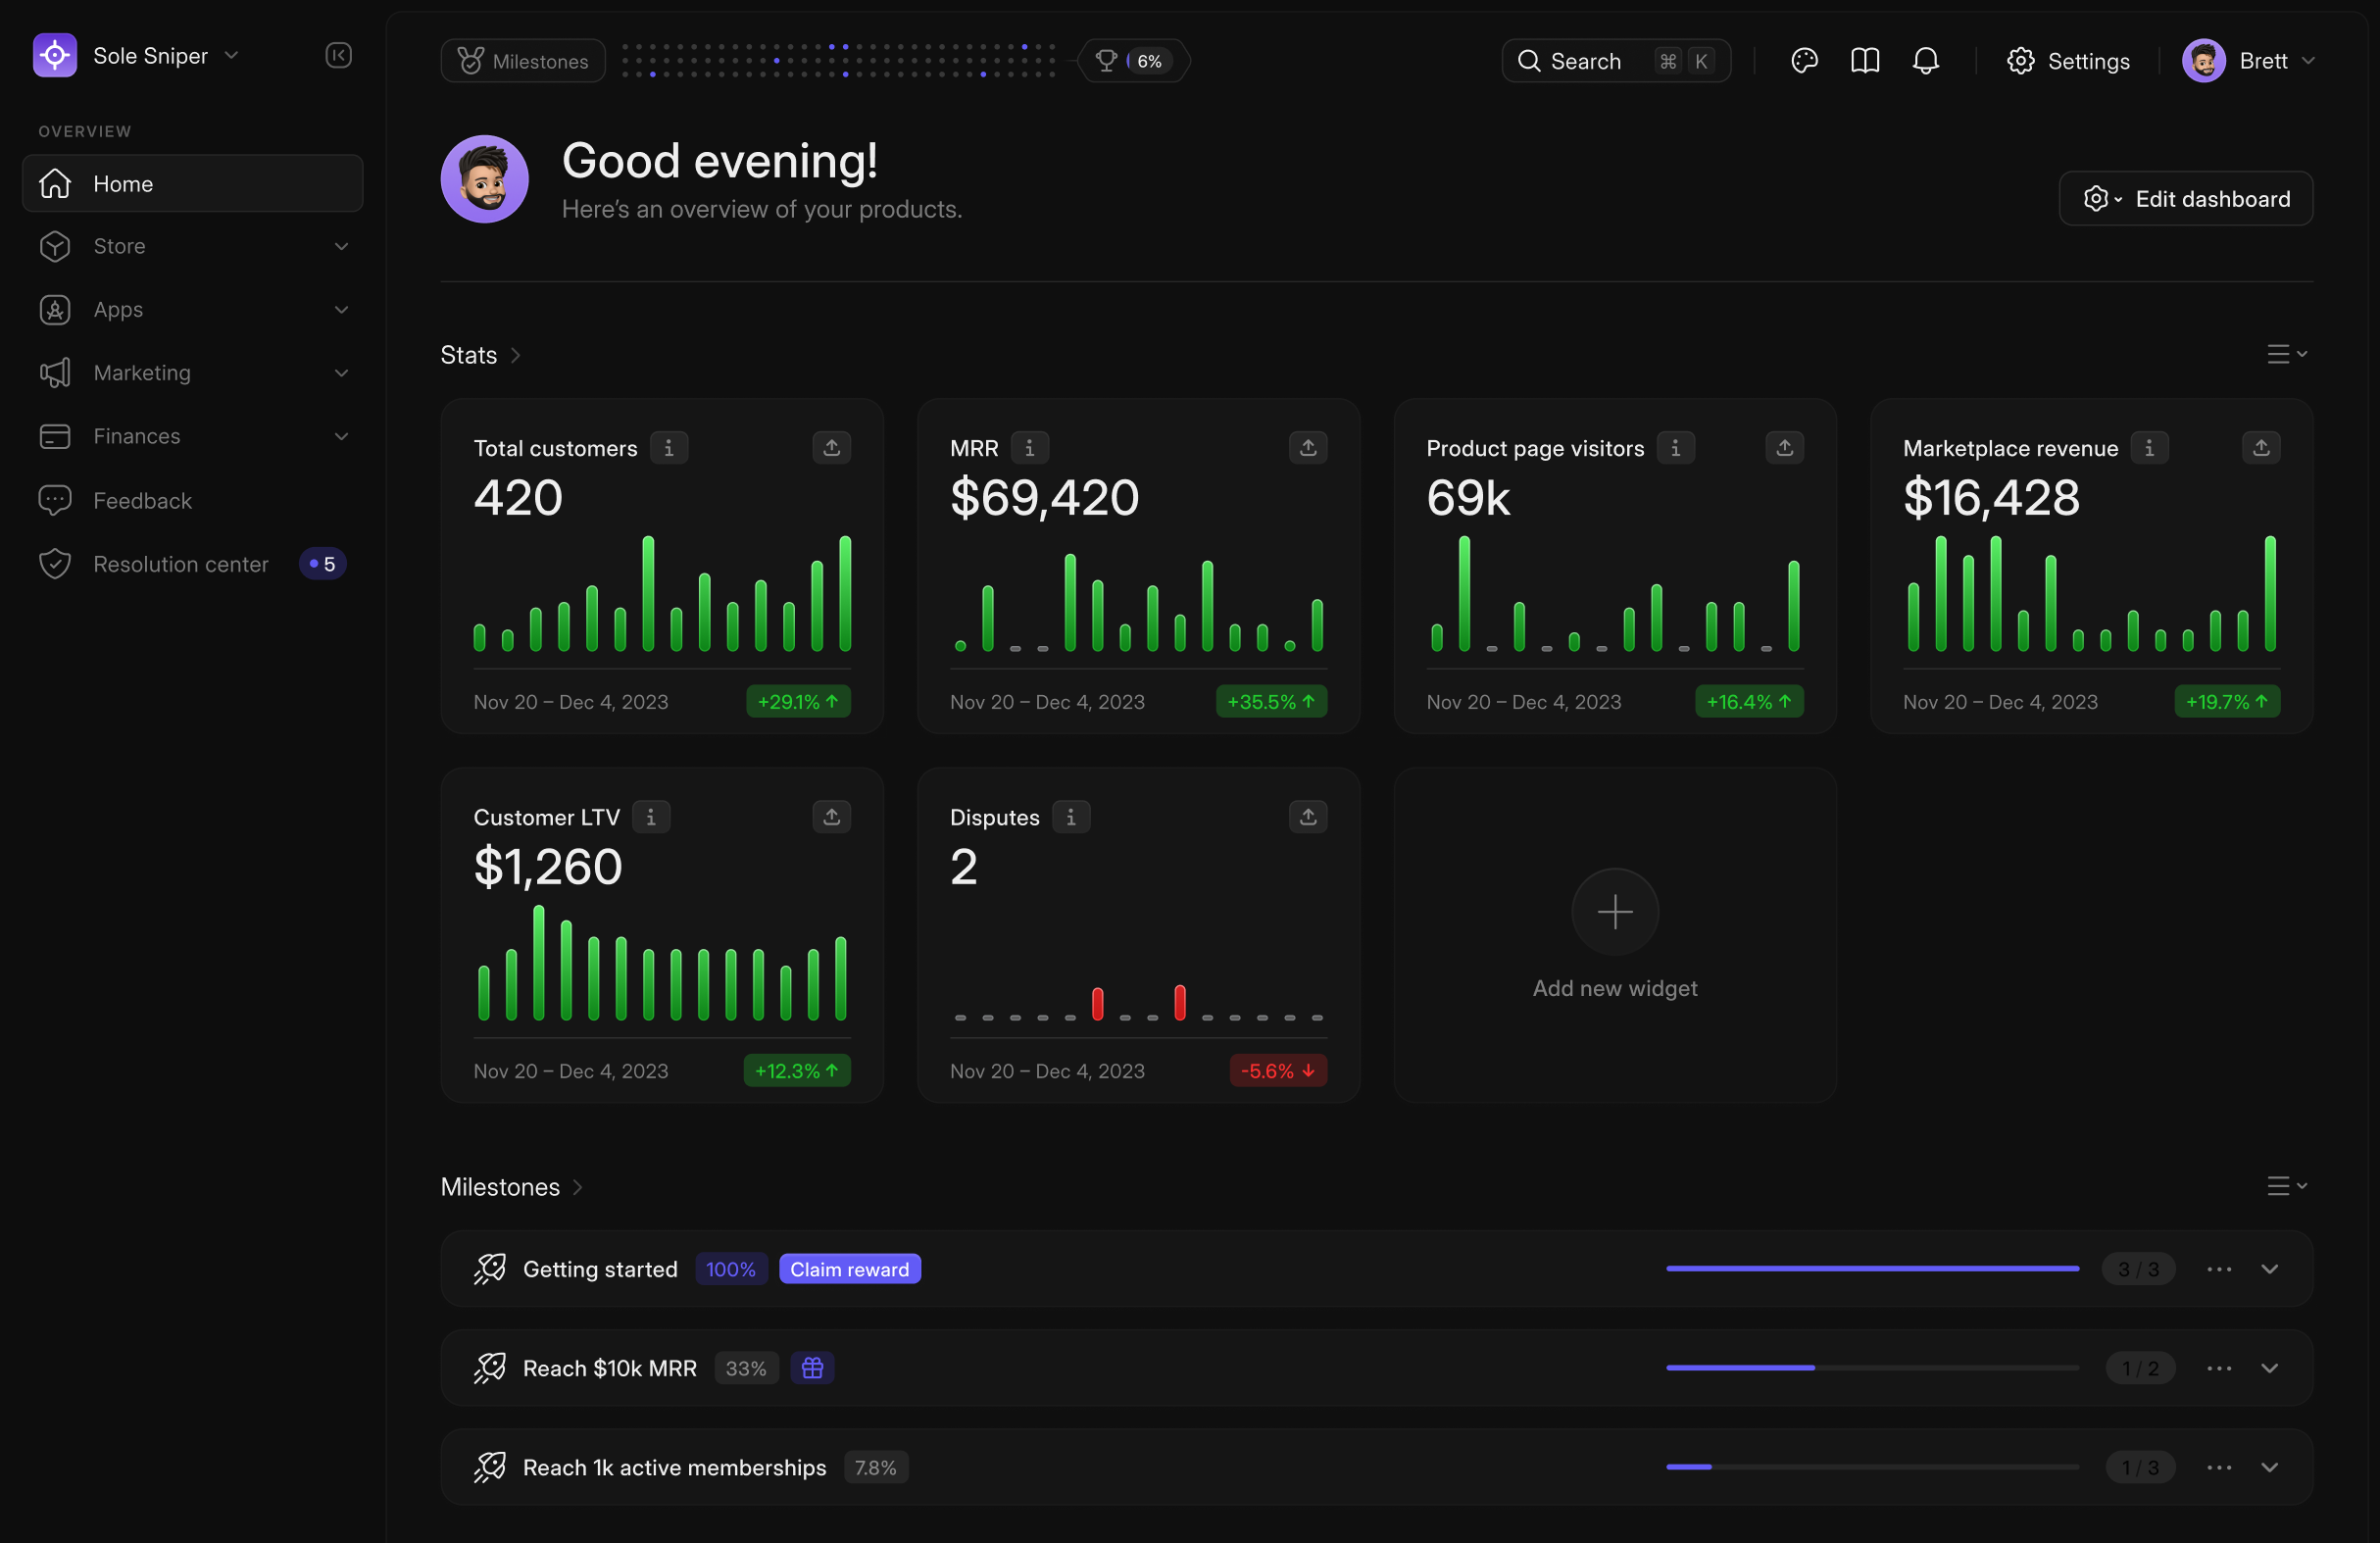 A mock of the Whop application UI. It shows a variety of graphs like total customers, MRR, Product page visitors, and more.